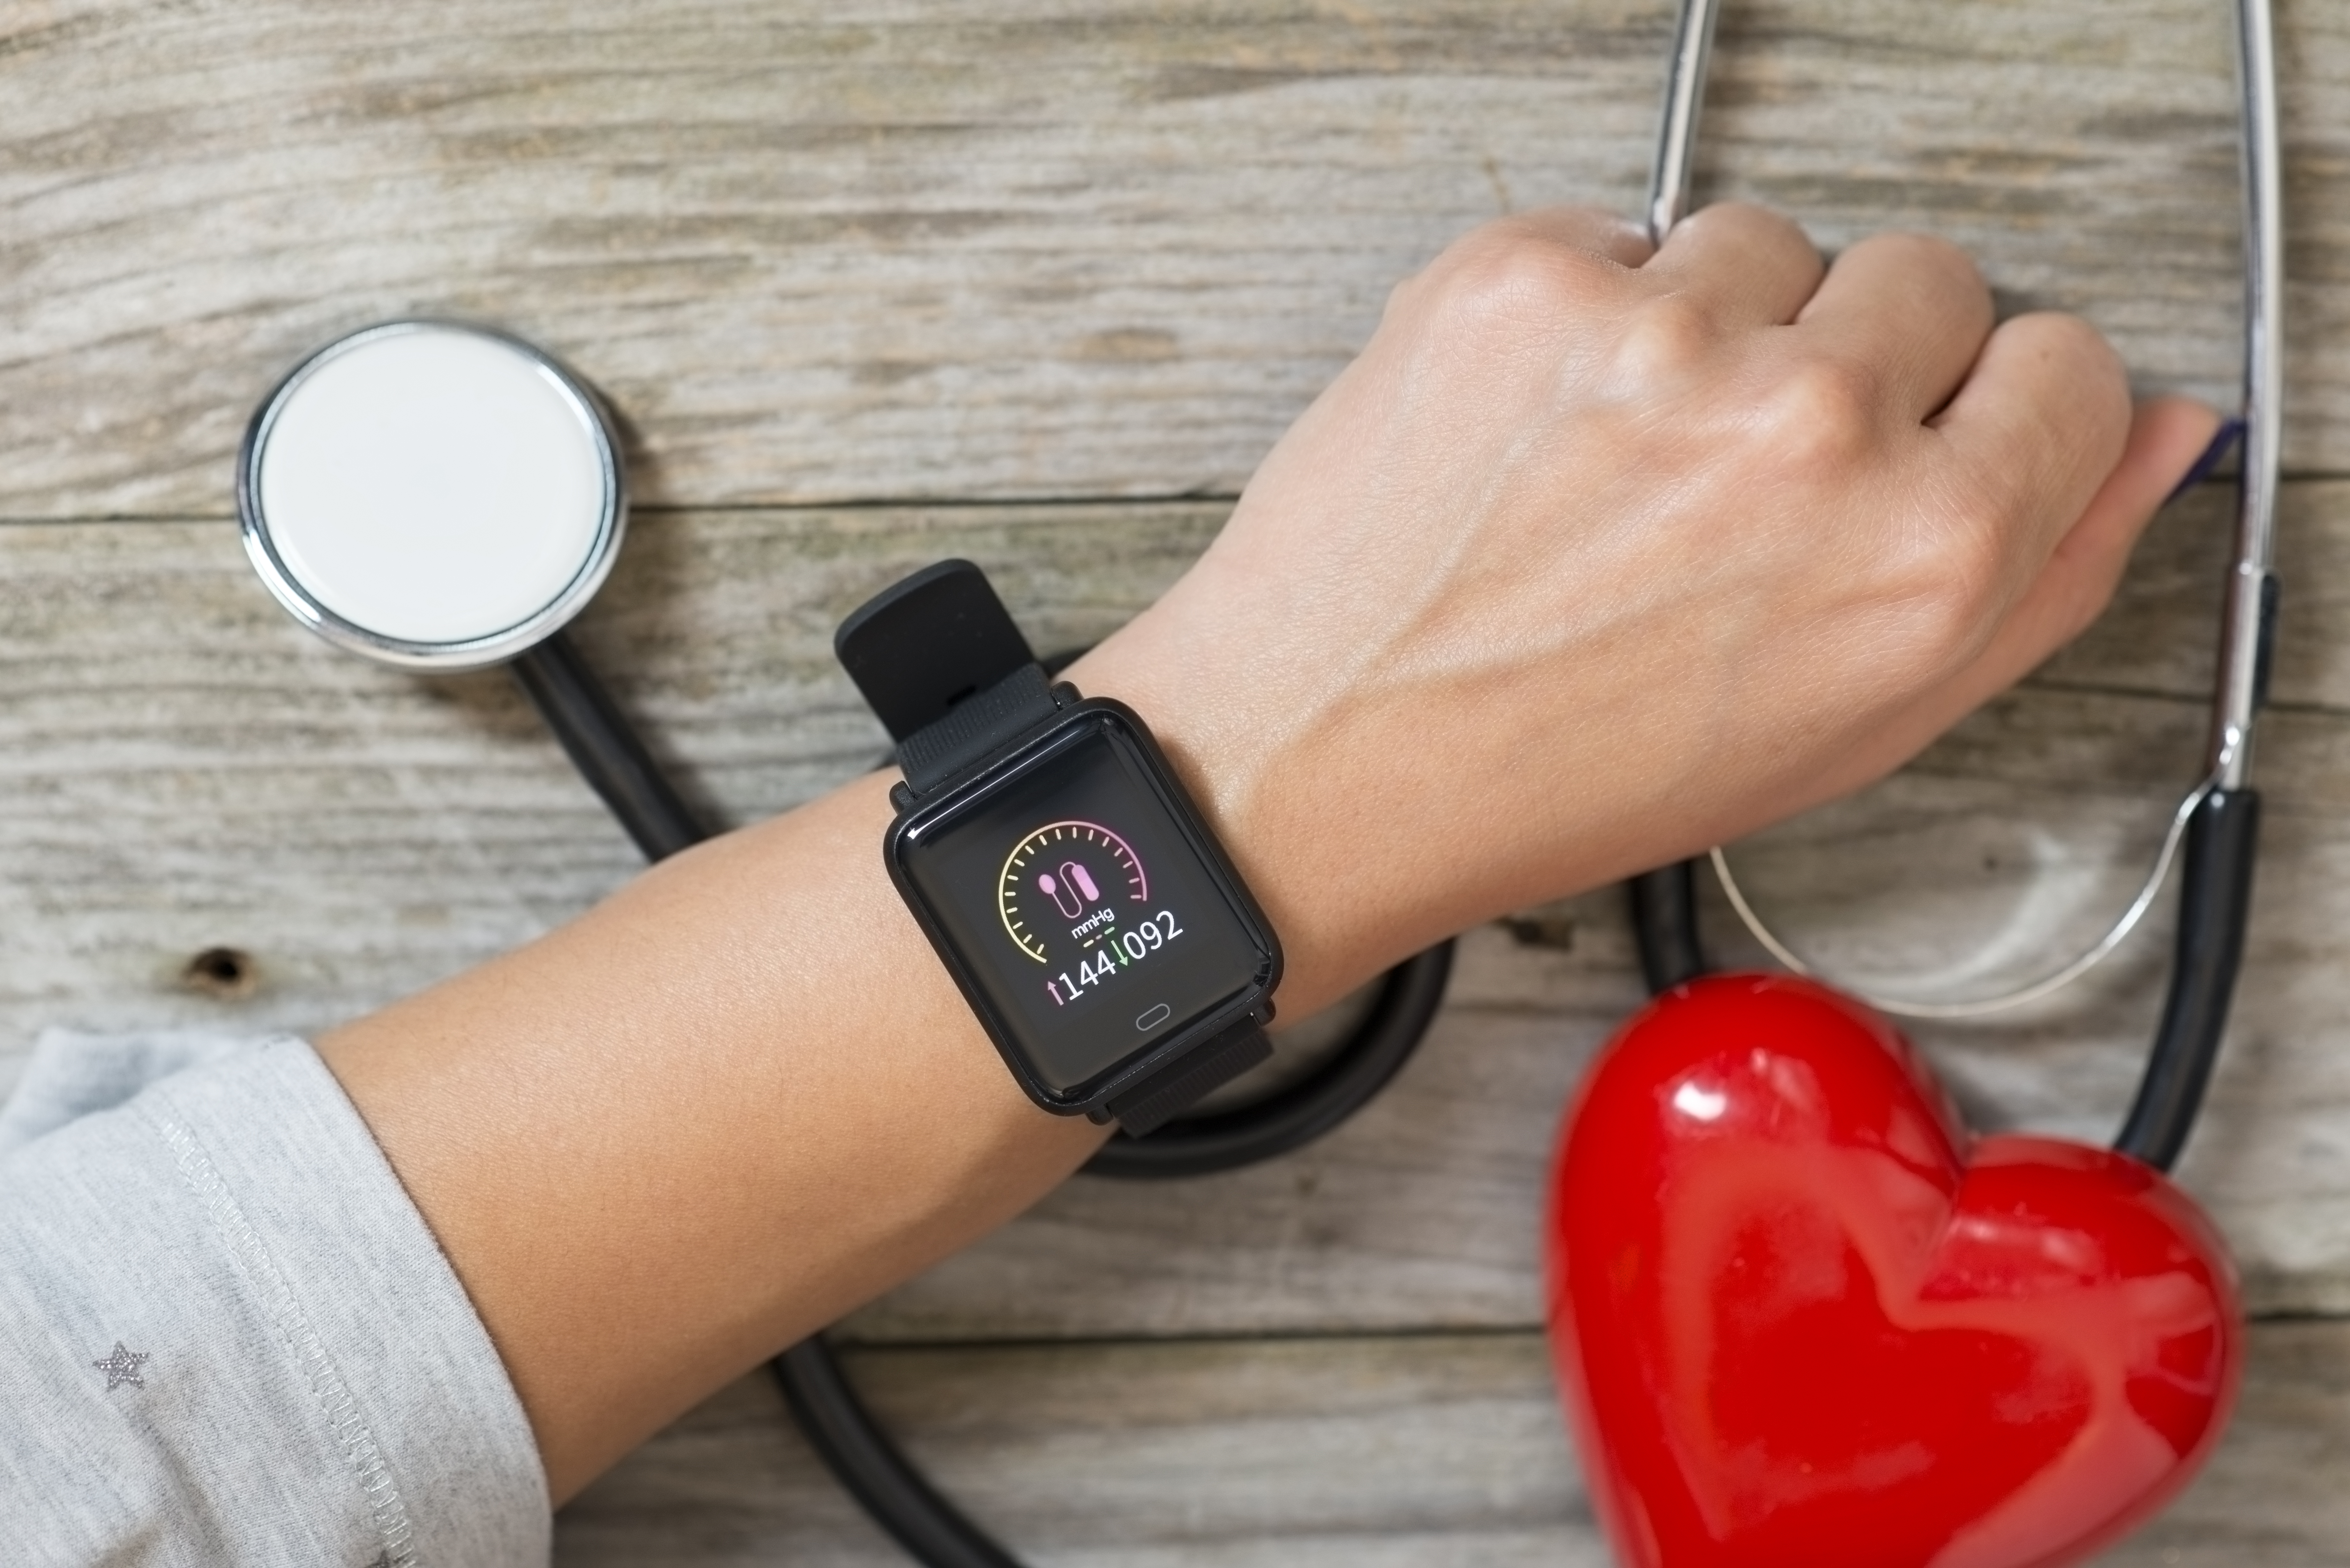 An image of an at home blood pressure monitor on someone's wrist